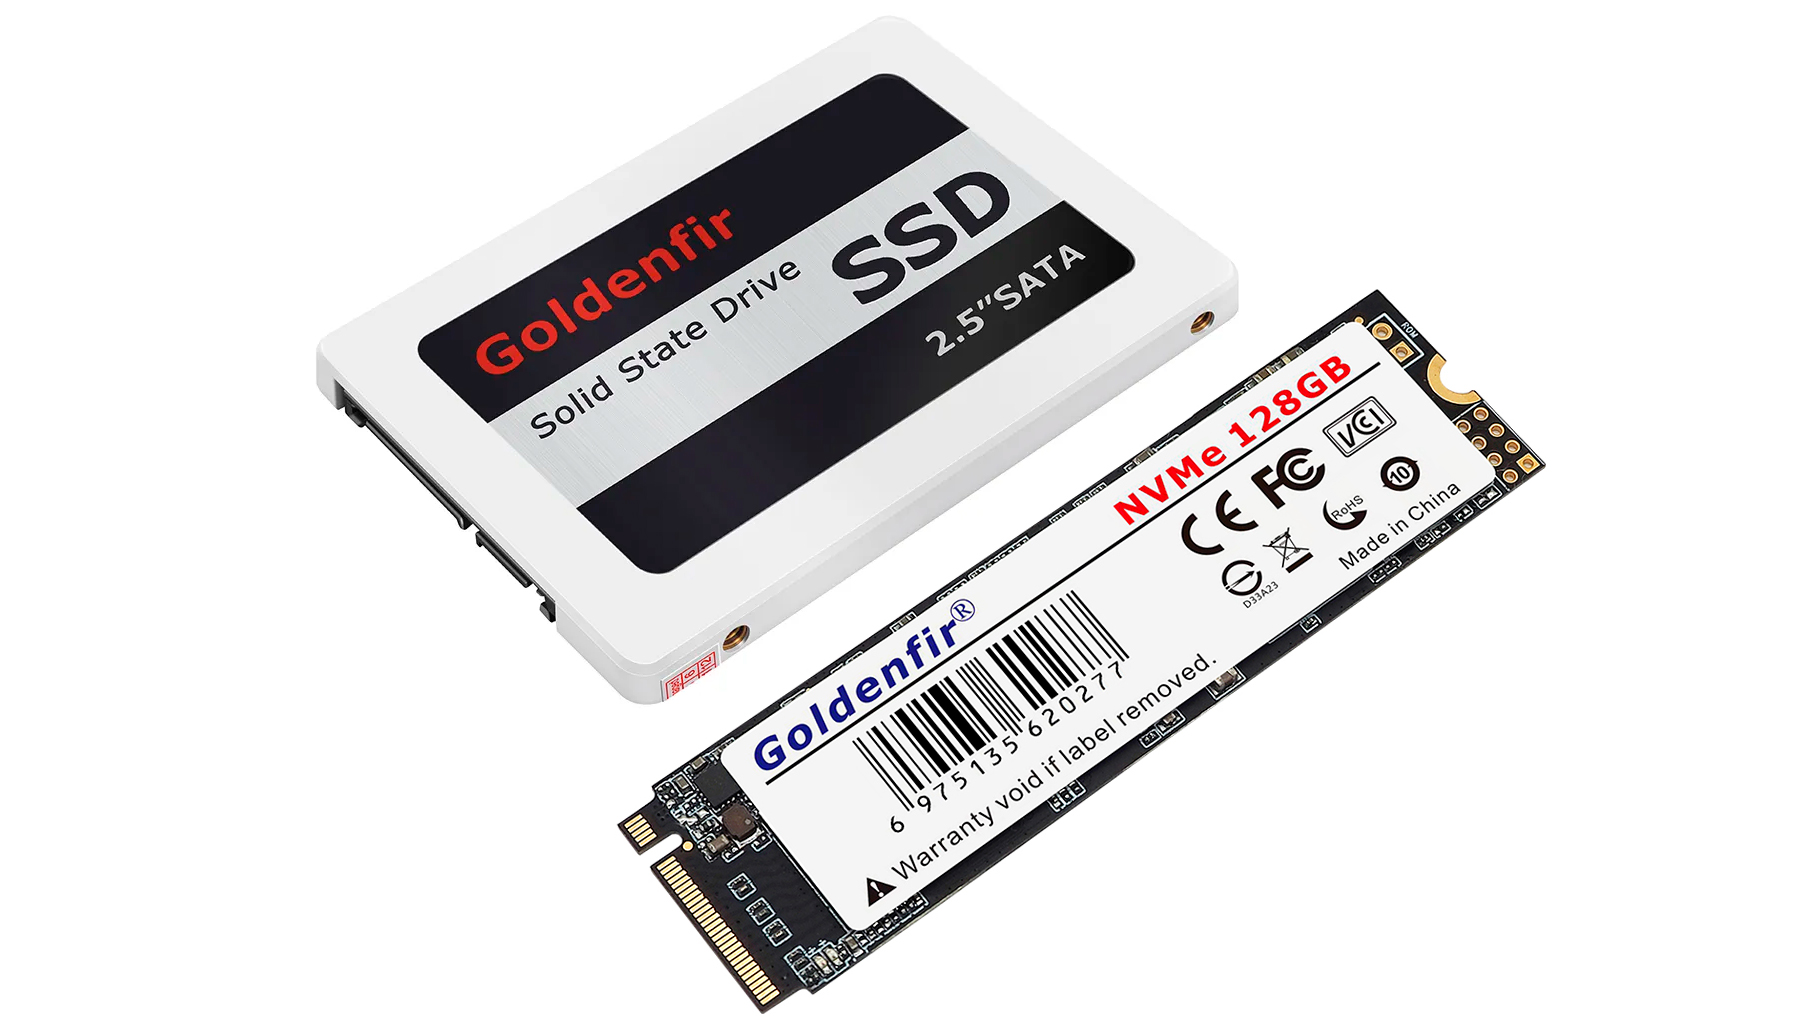 $3 SATA SSD vs $5 NVMe SSD: Which Is The Better Deal? | Tom's Hardware